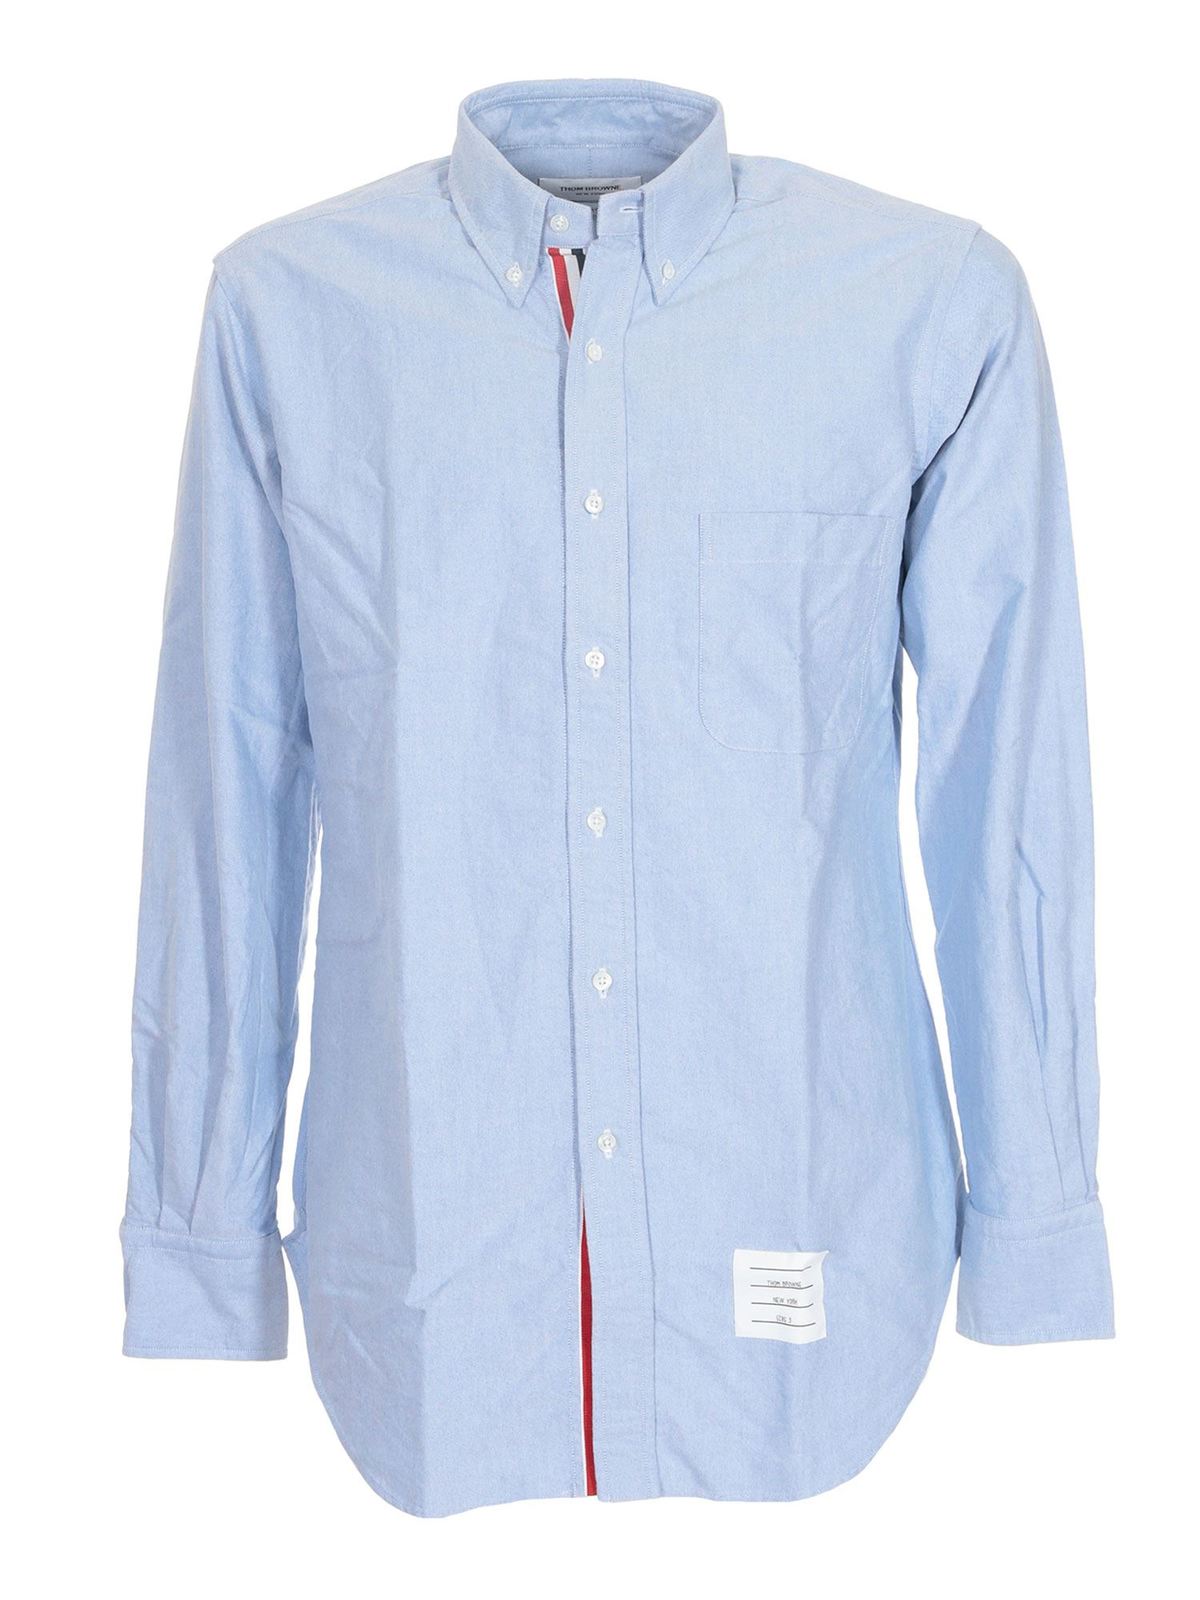 Thom Browne Classic Oxford Shirt In Light Blue